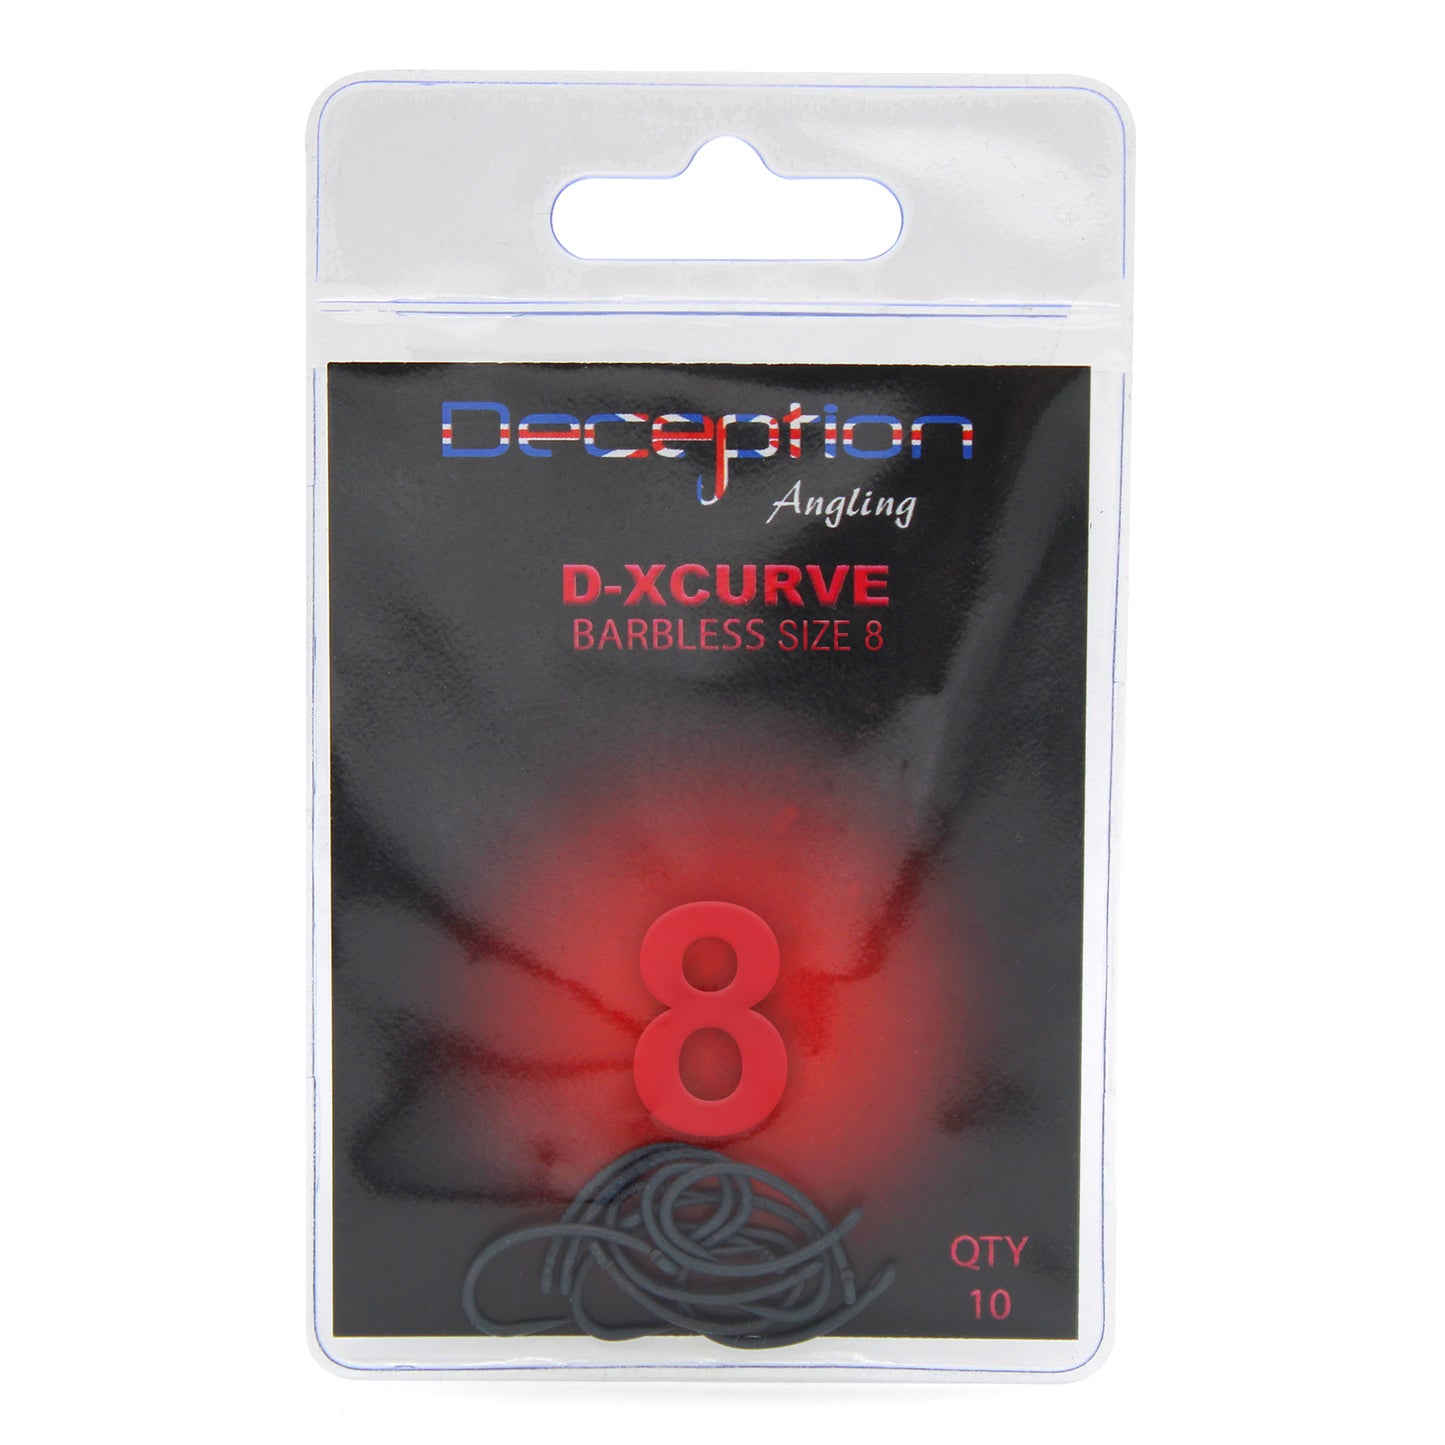 Deception Angling D-XCurve Barbless Fishing Hooks Pack of 10 Size 8